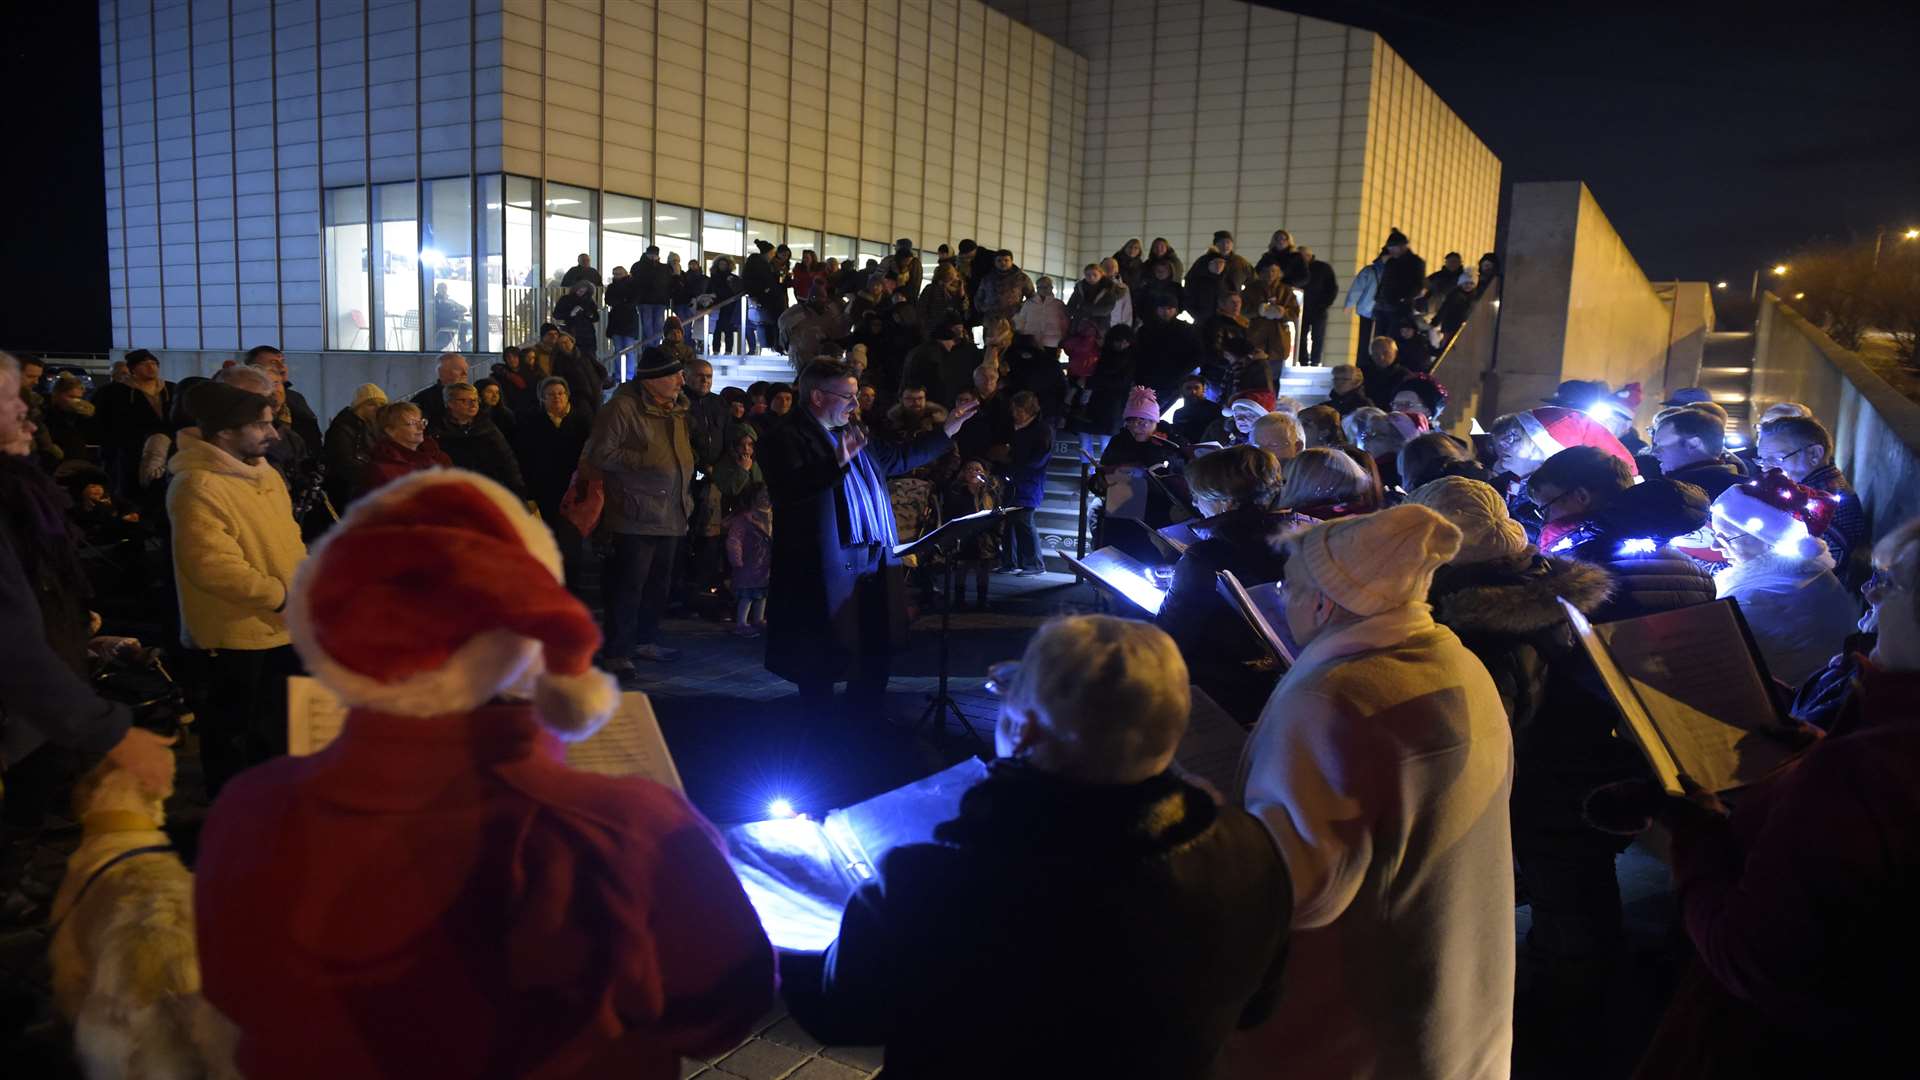 Thanet Big Sing Community Choir entertained before the lights were turned on